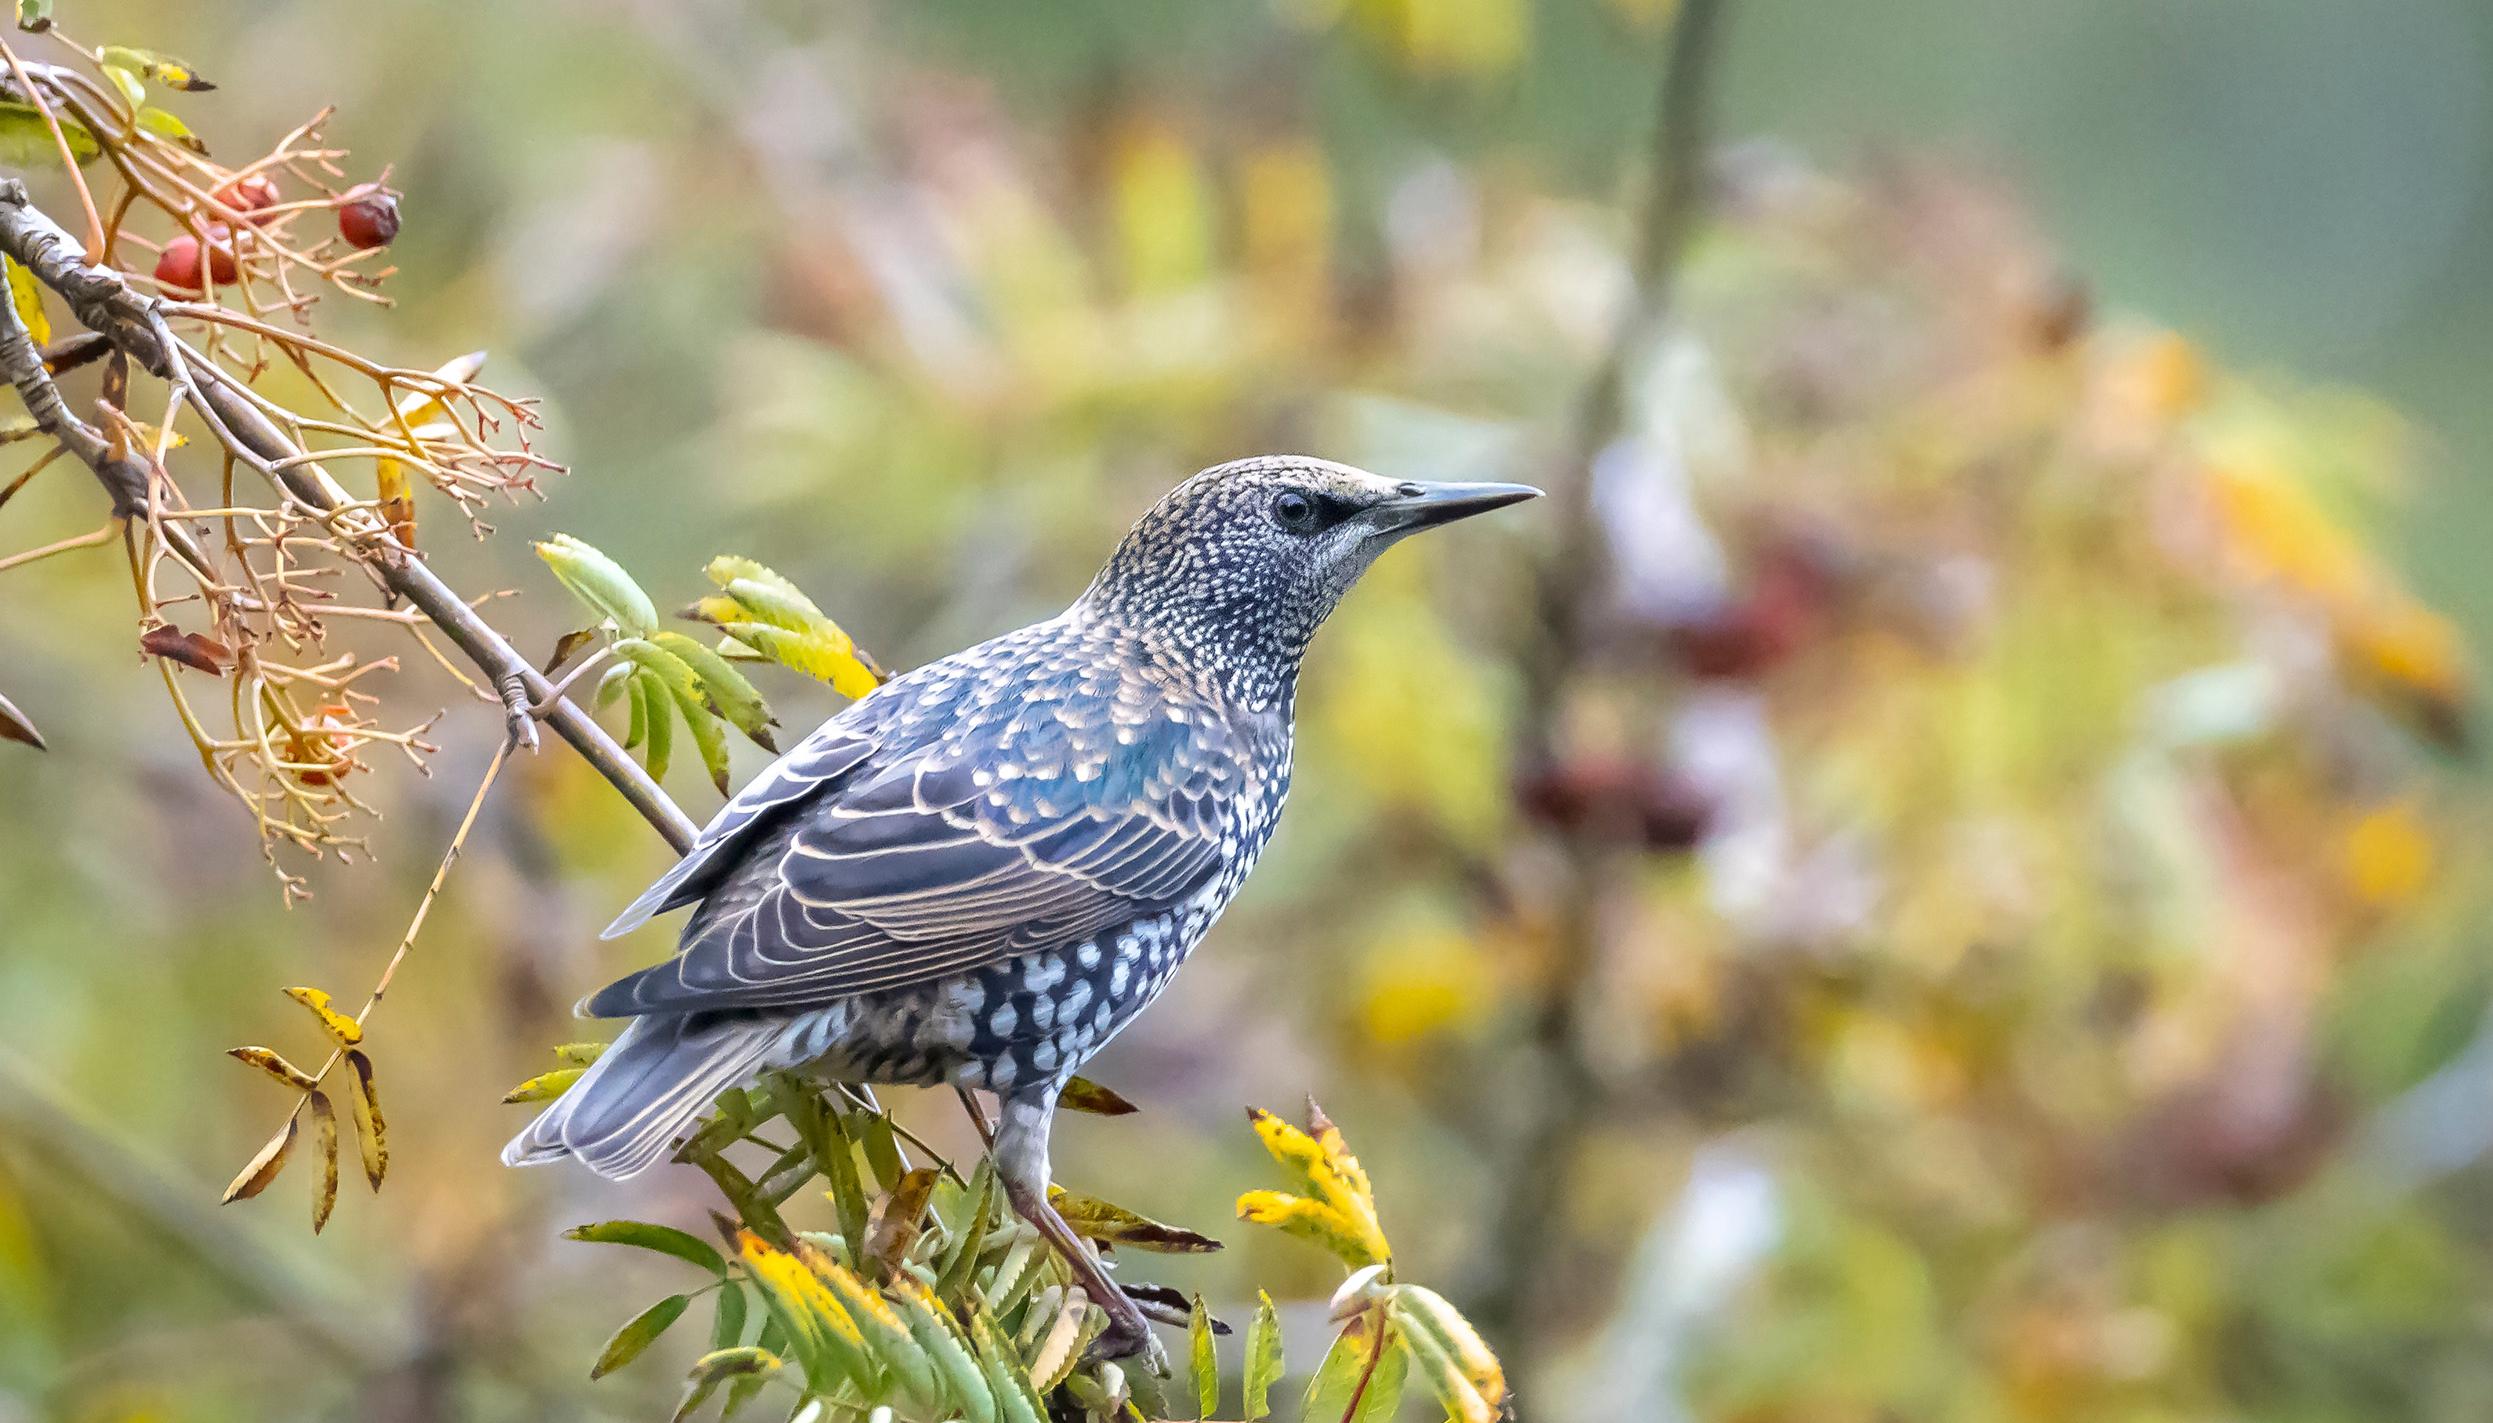 A Starling in winter plumage perched on a twig in a leafy tree.